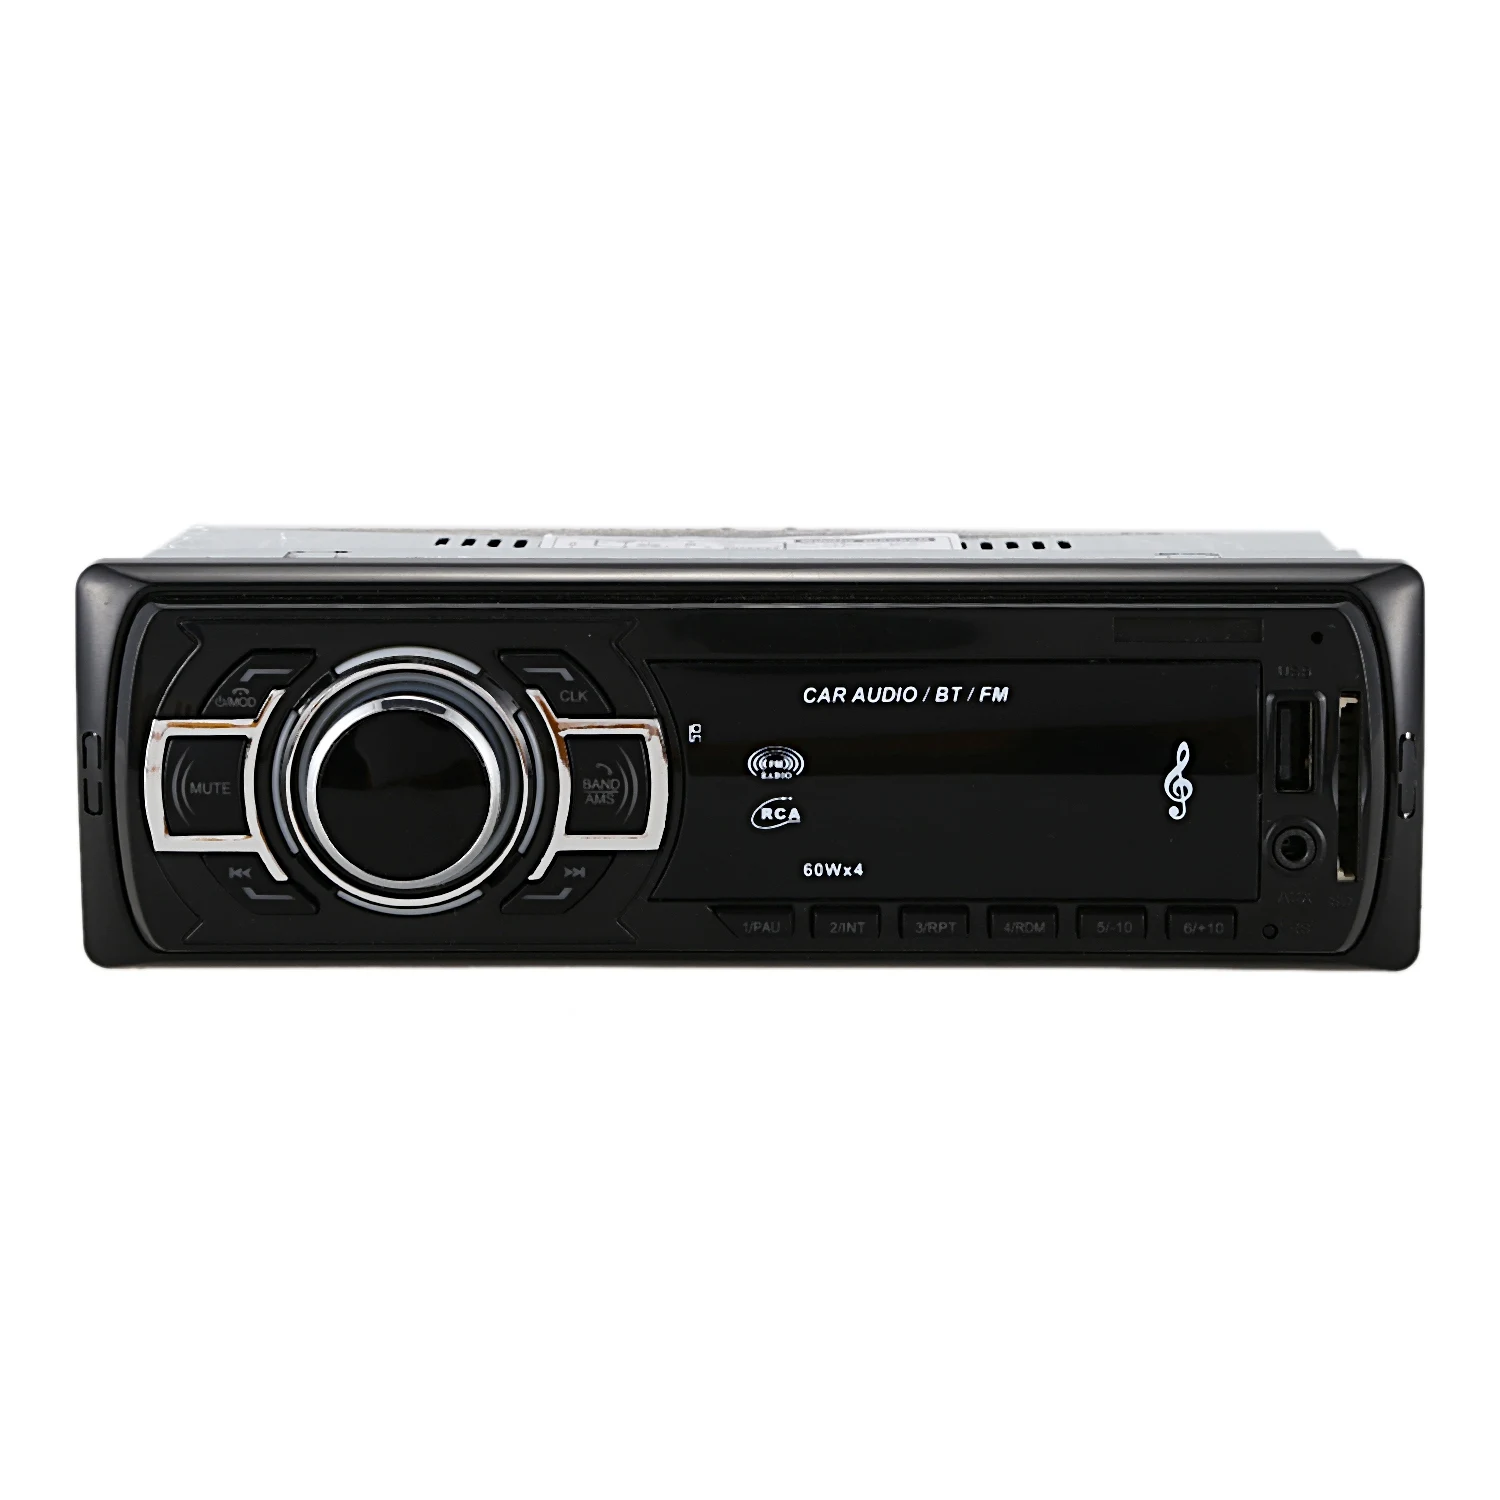 

NEW-Car Dvd Sd Card Reader Usb Car Mp3 Player With Bluetooth Panel Fm Tuner Aux In Remote Control 1Din Car Radio 522